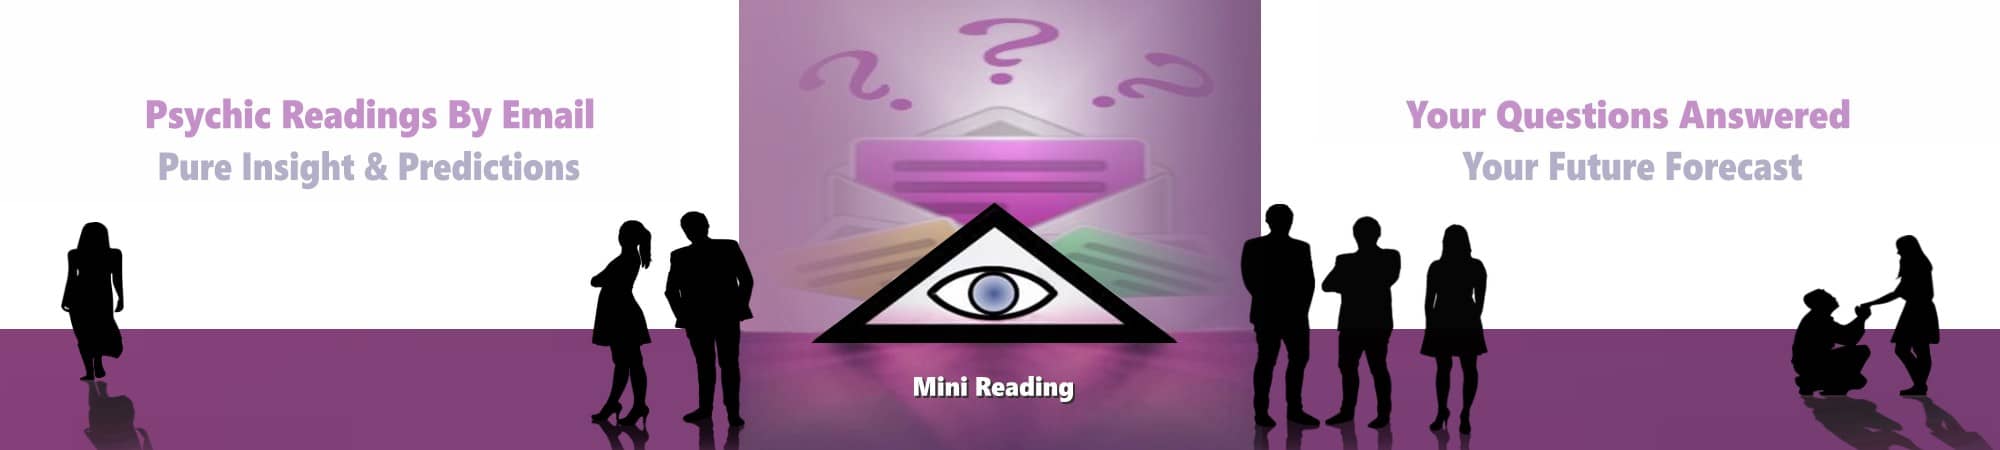 mini email psychic reading page